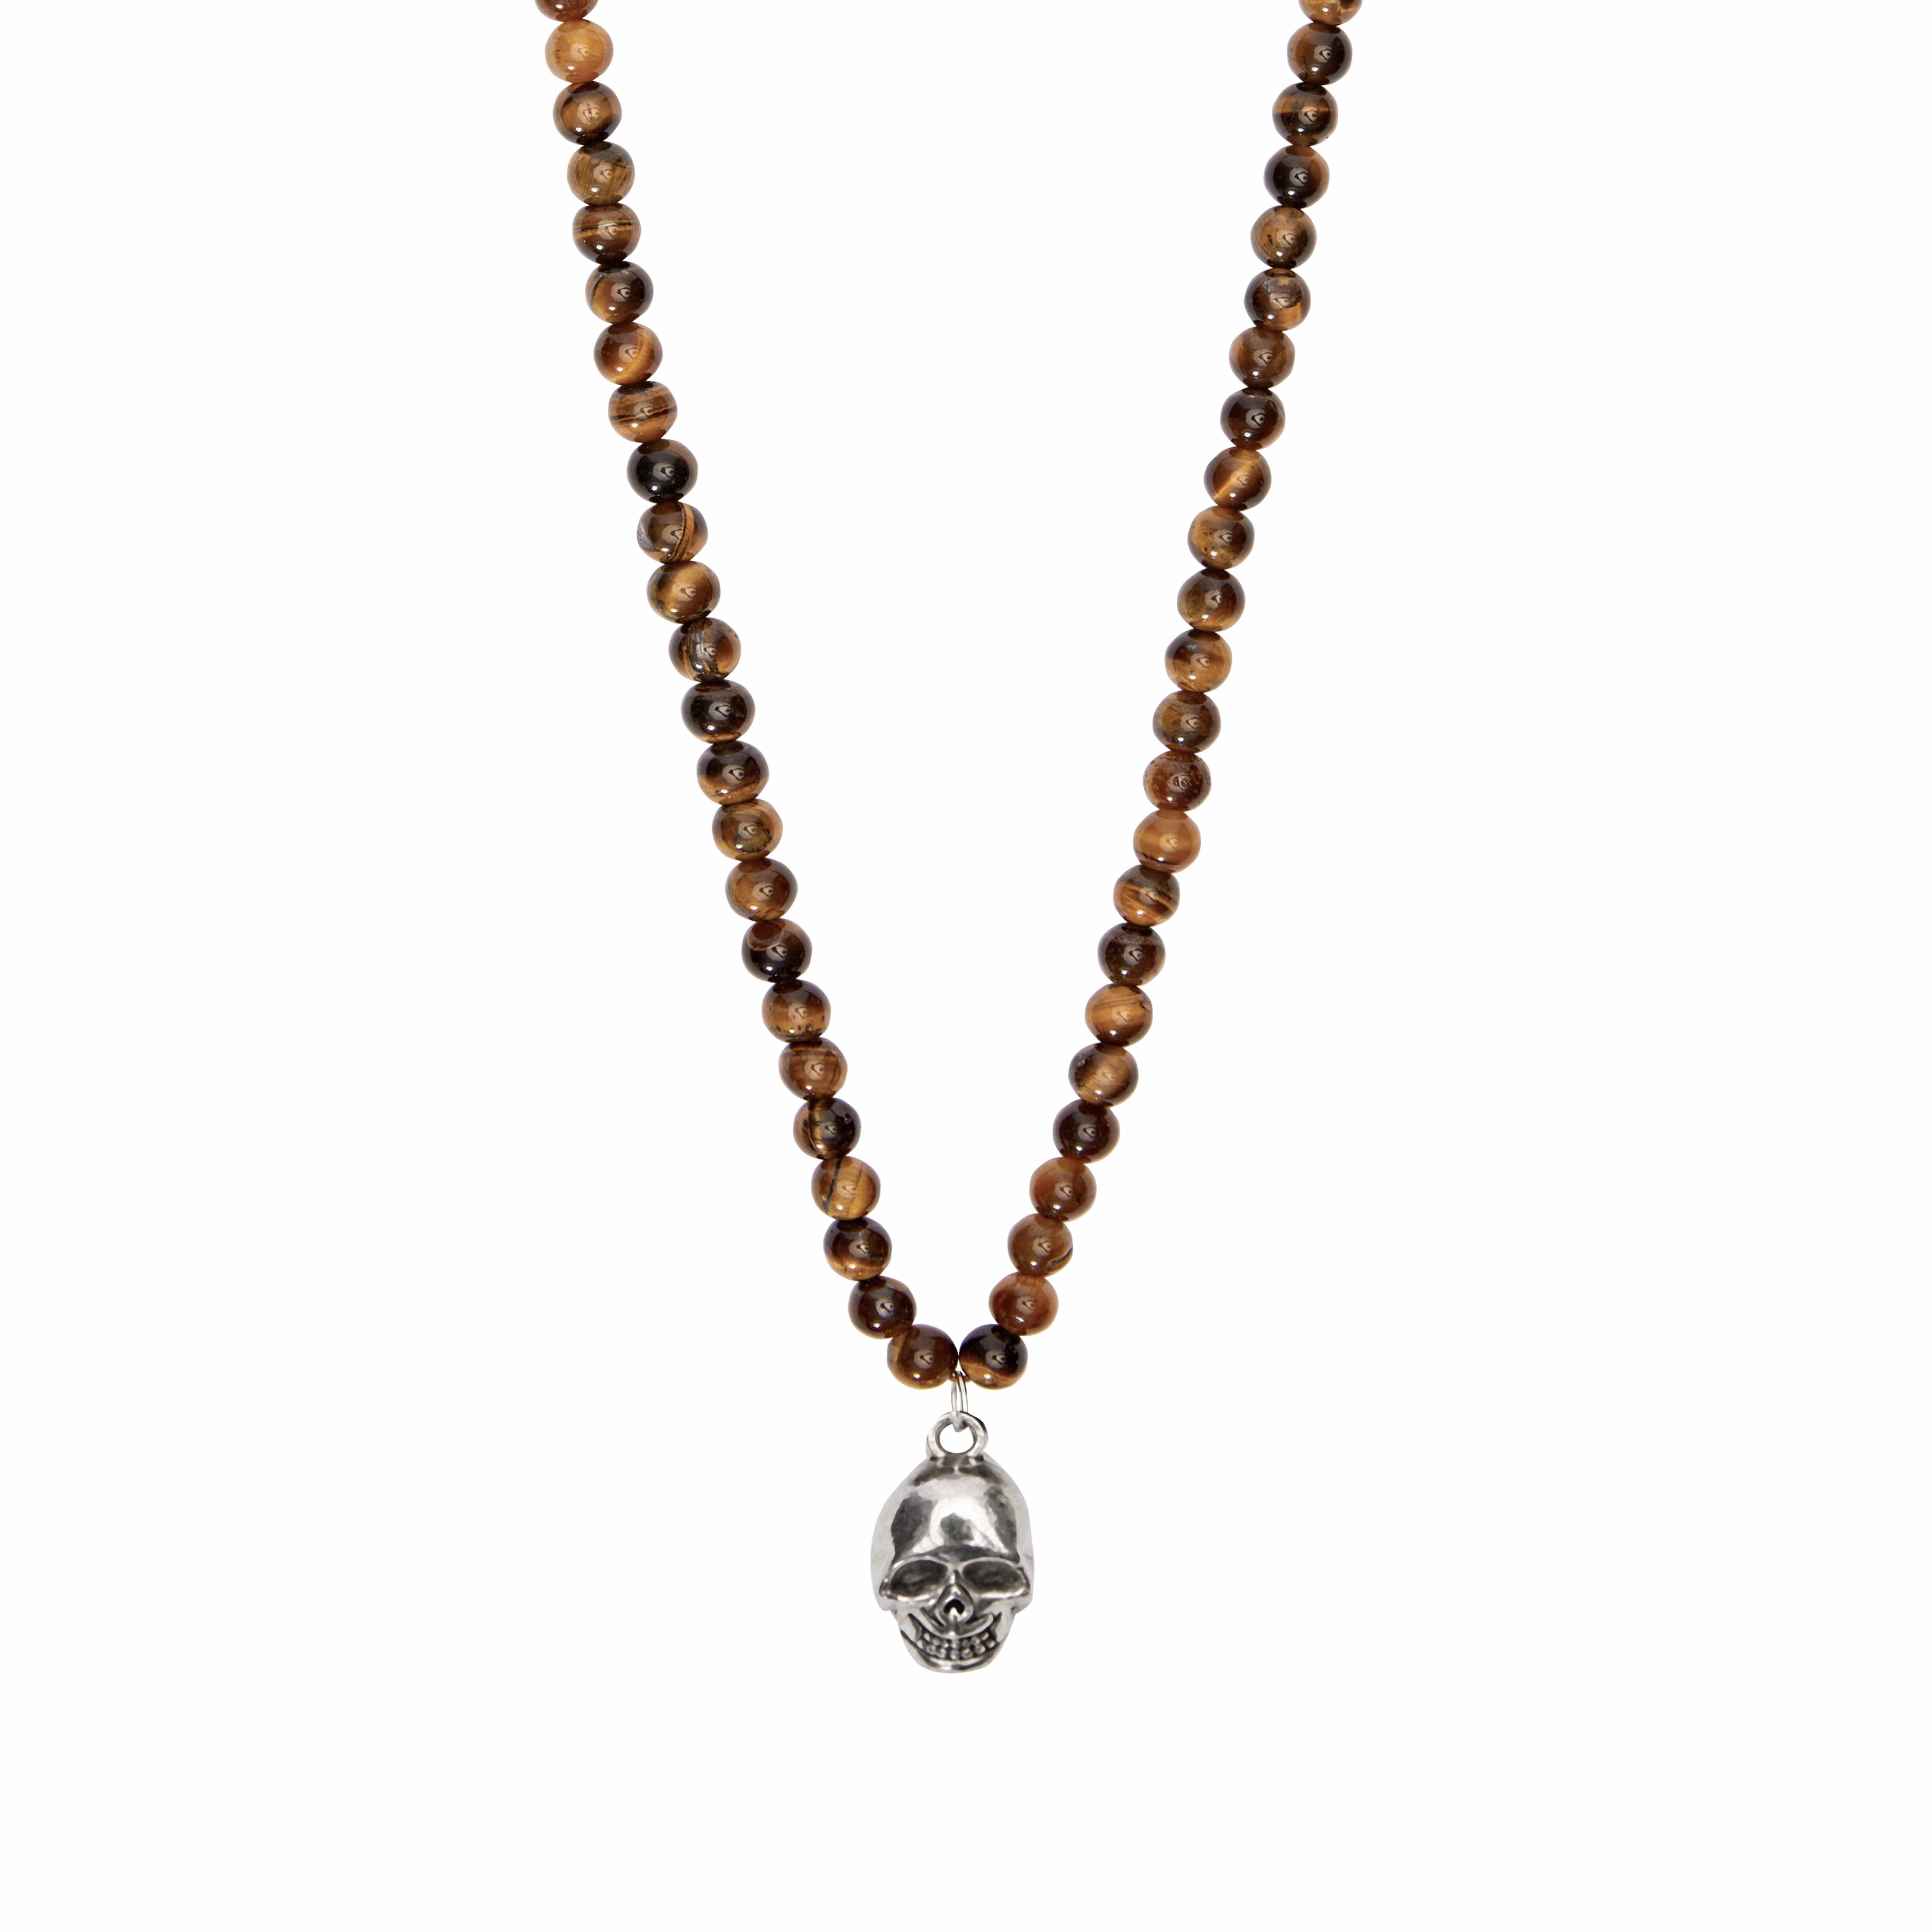 Necklace-"VIRO"-tiger's eye with skull